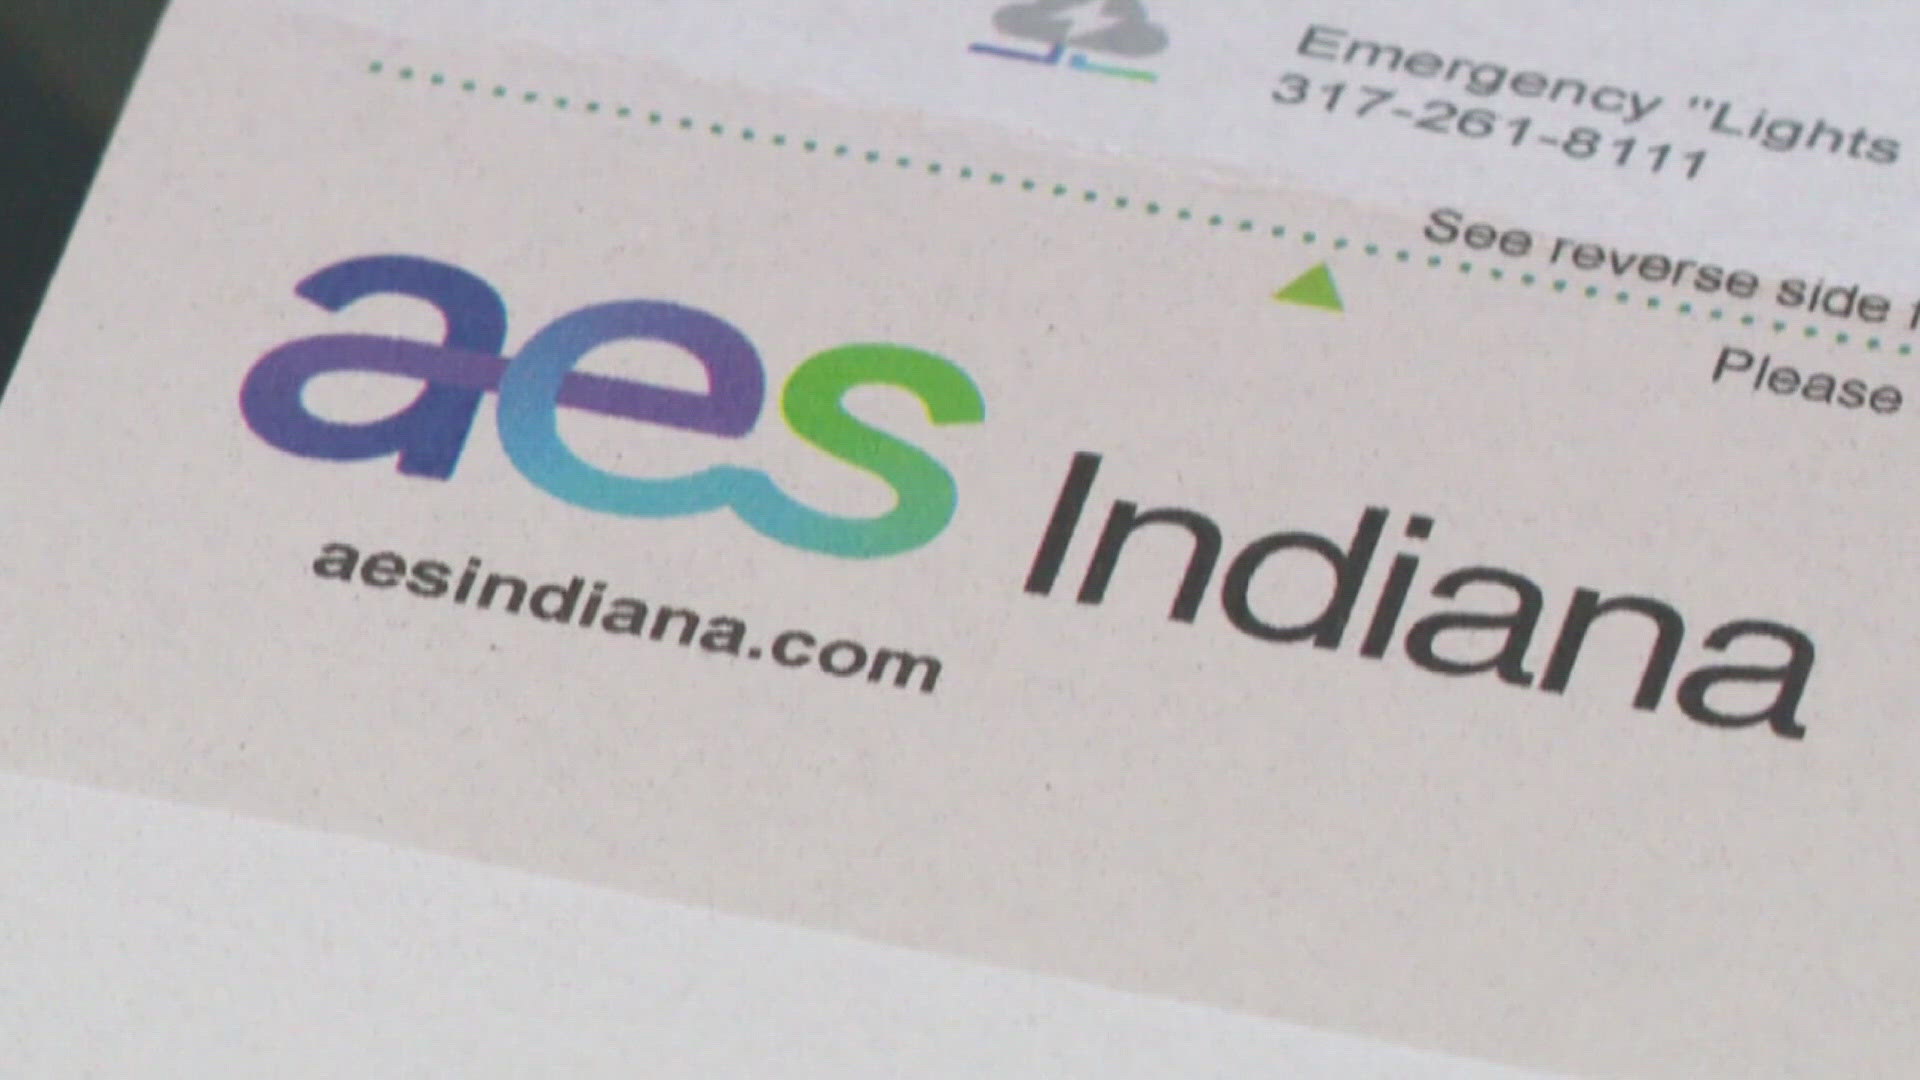 Some customers say their AES bills are out of sorts after the company updated its billing system in November. Allison Gormly tells us What's the Deal.